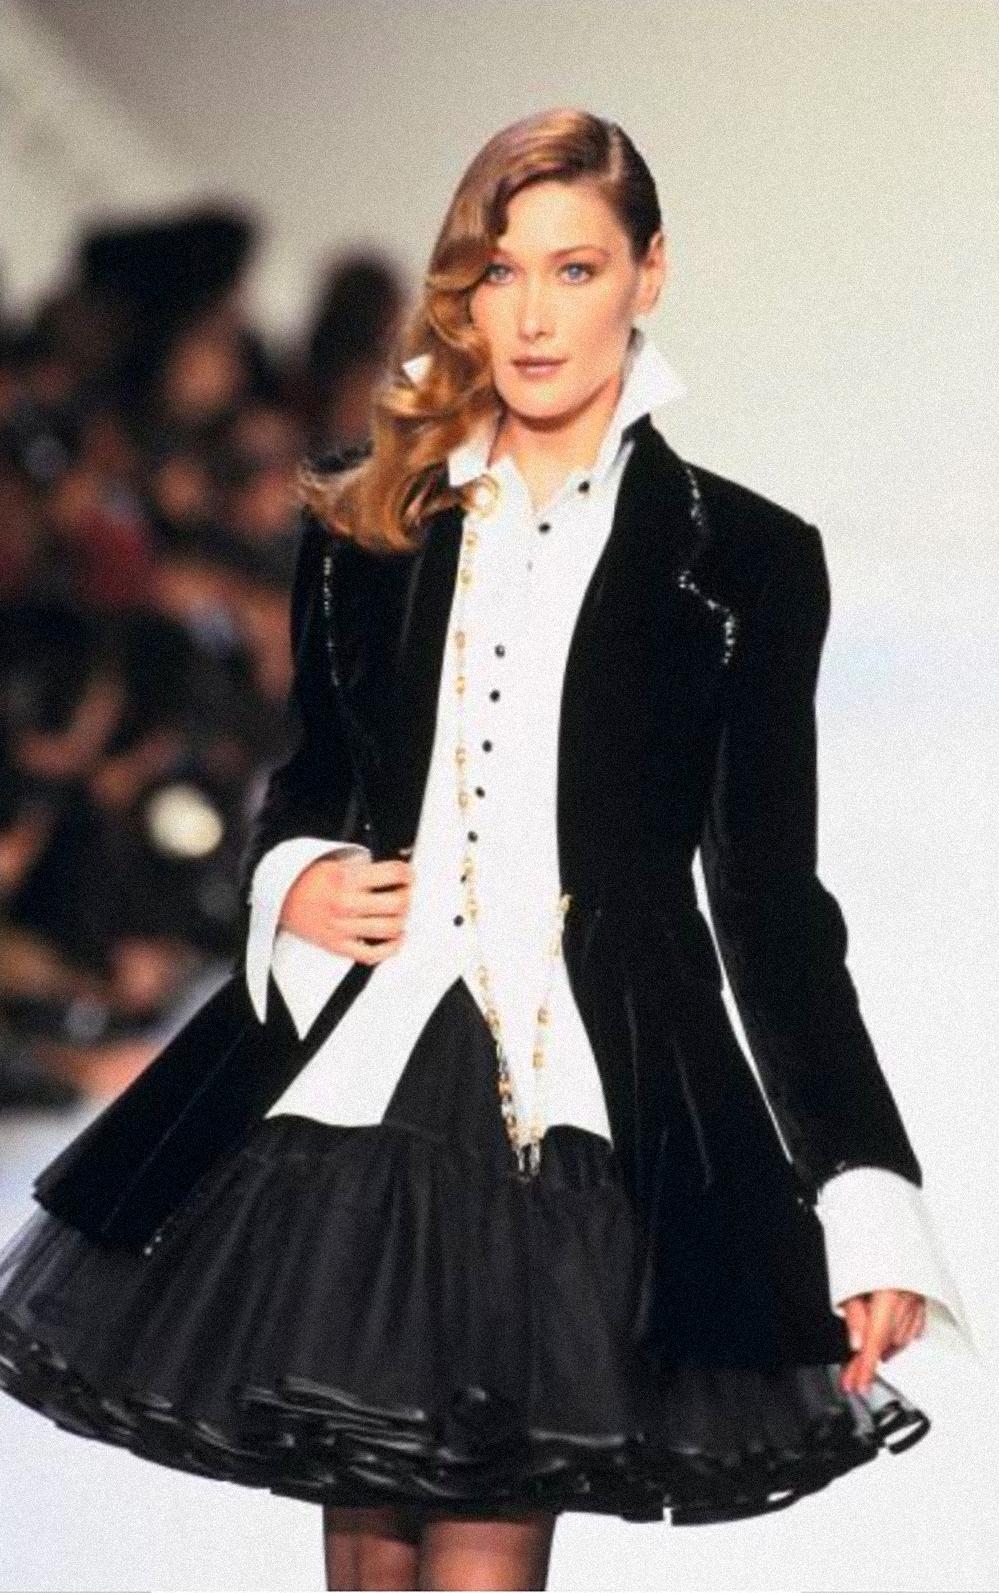 Christian Dior by Gianfranco Ferre, FW 1994 Collection, numbered archival piece. Documented and famously worn by Carla Bruni on the Runway.

From the illustrious atelier of Christian Dior comes a masterpiece of the Fall Winter 1994 Collection,